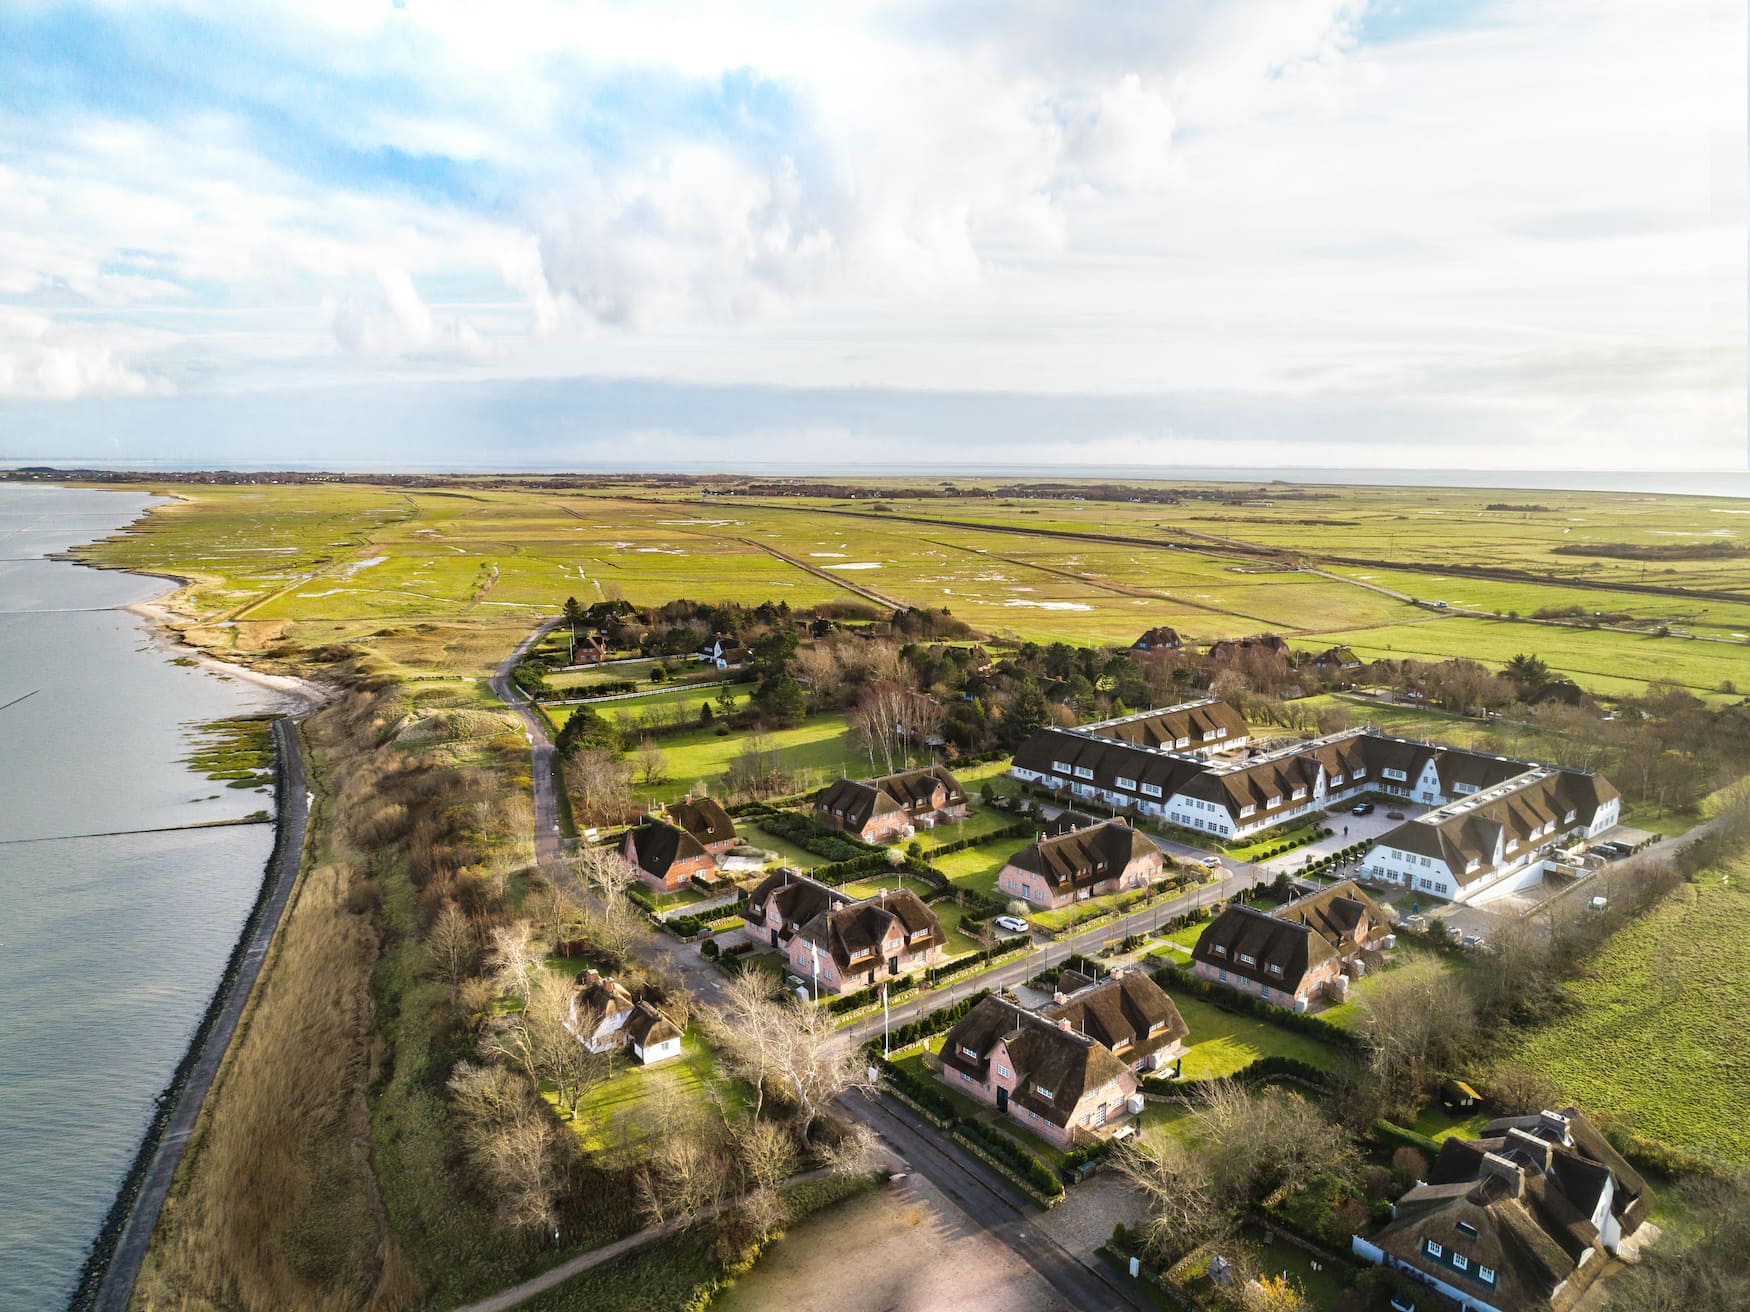 Bird's eye view of Severin*s Sylt on the dunes of the North Sea